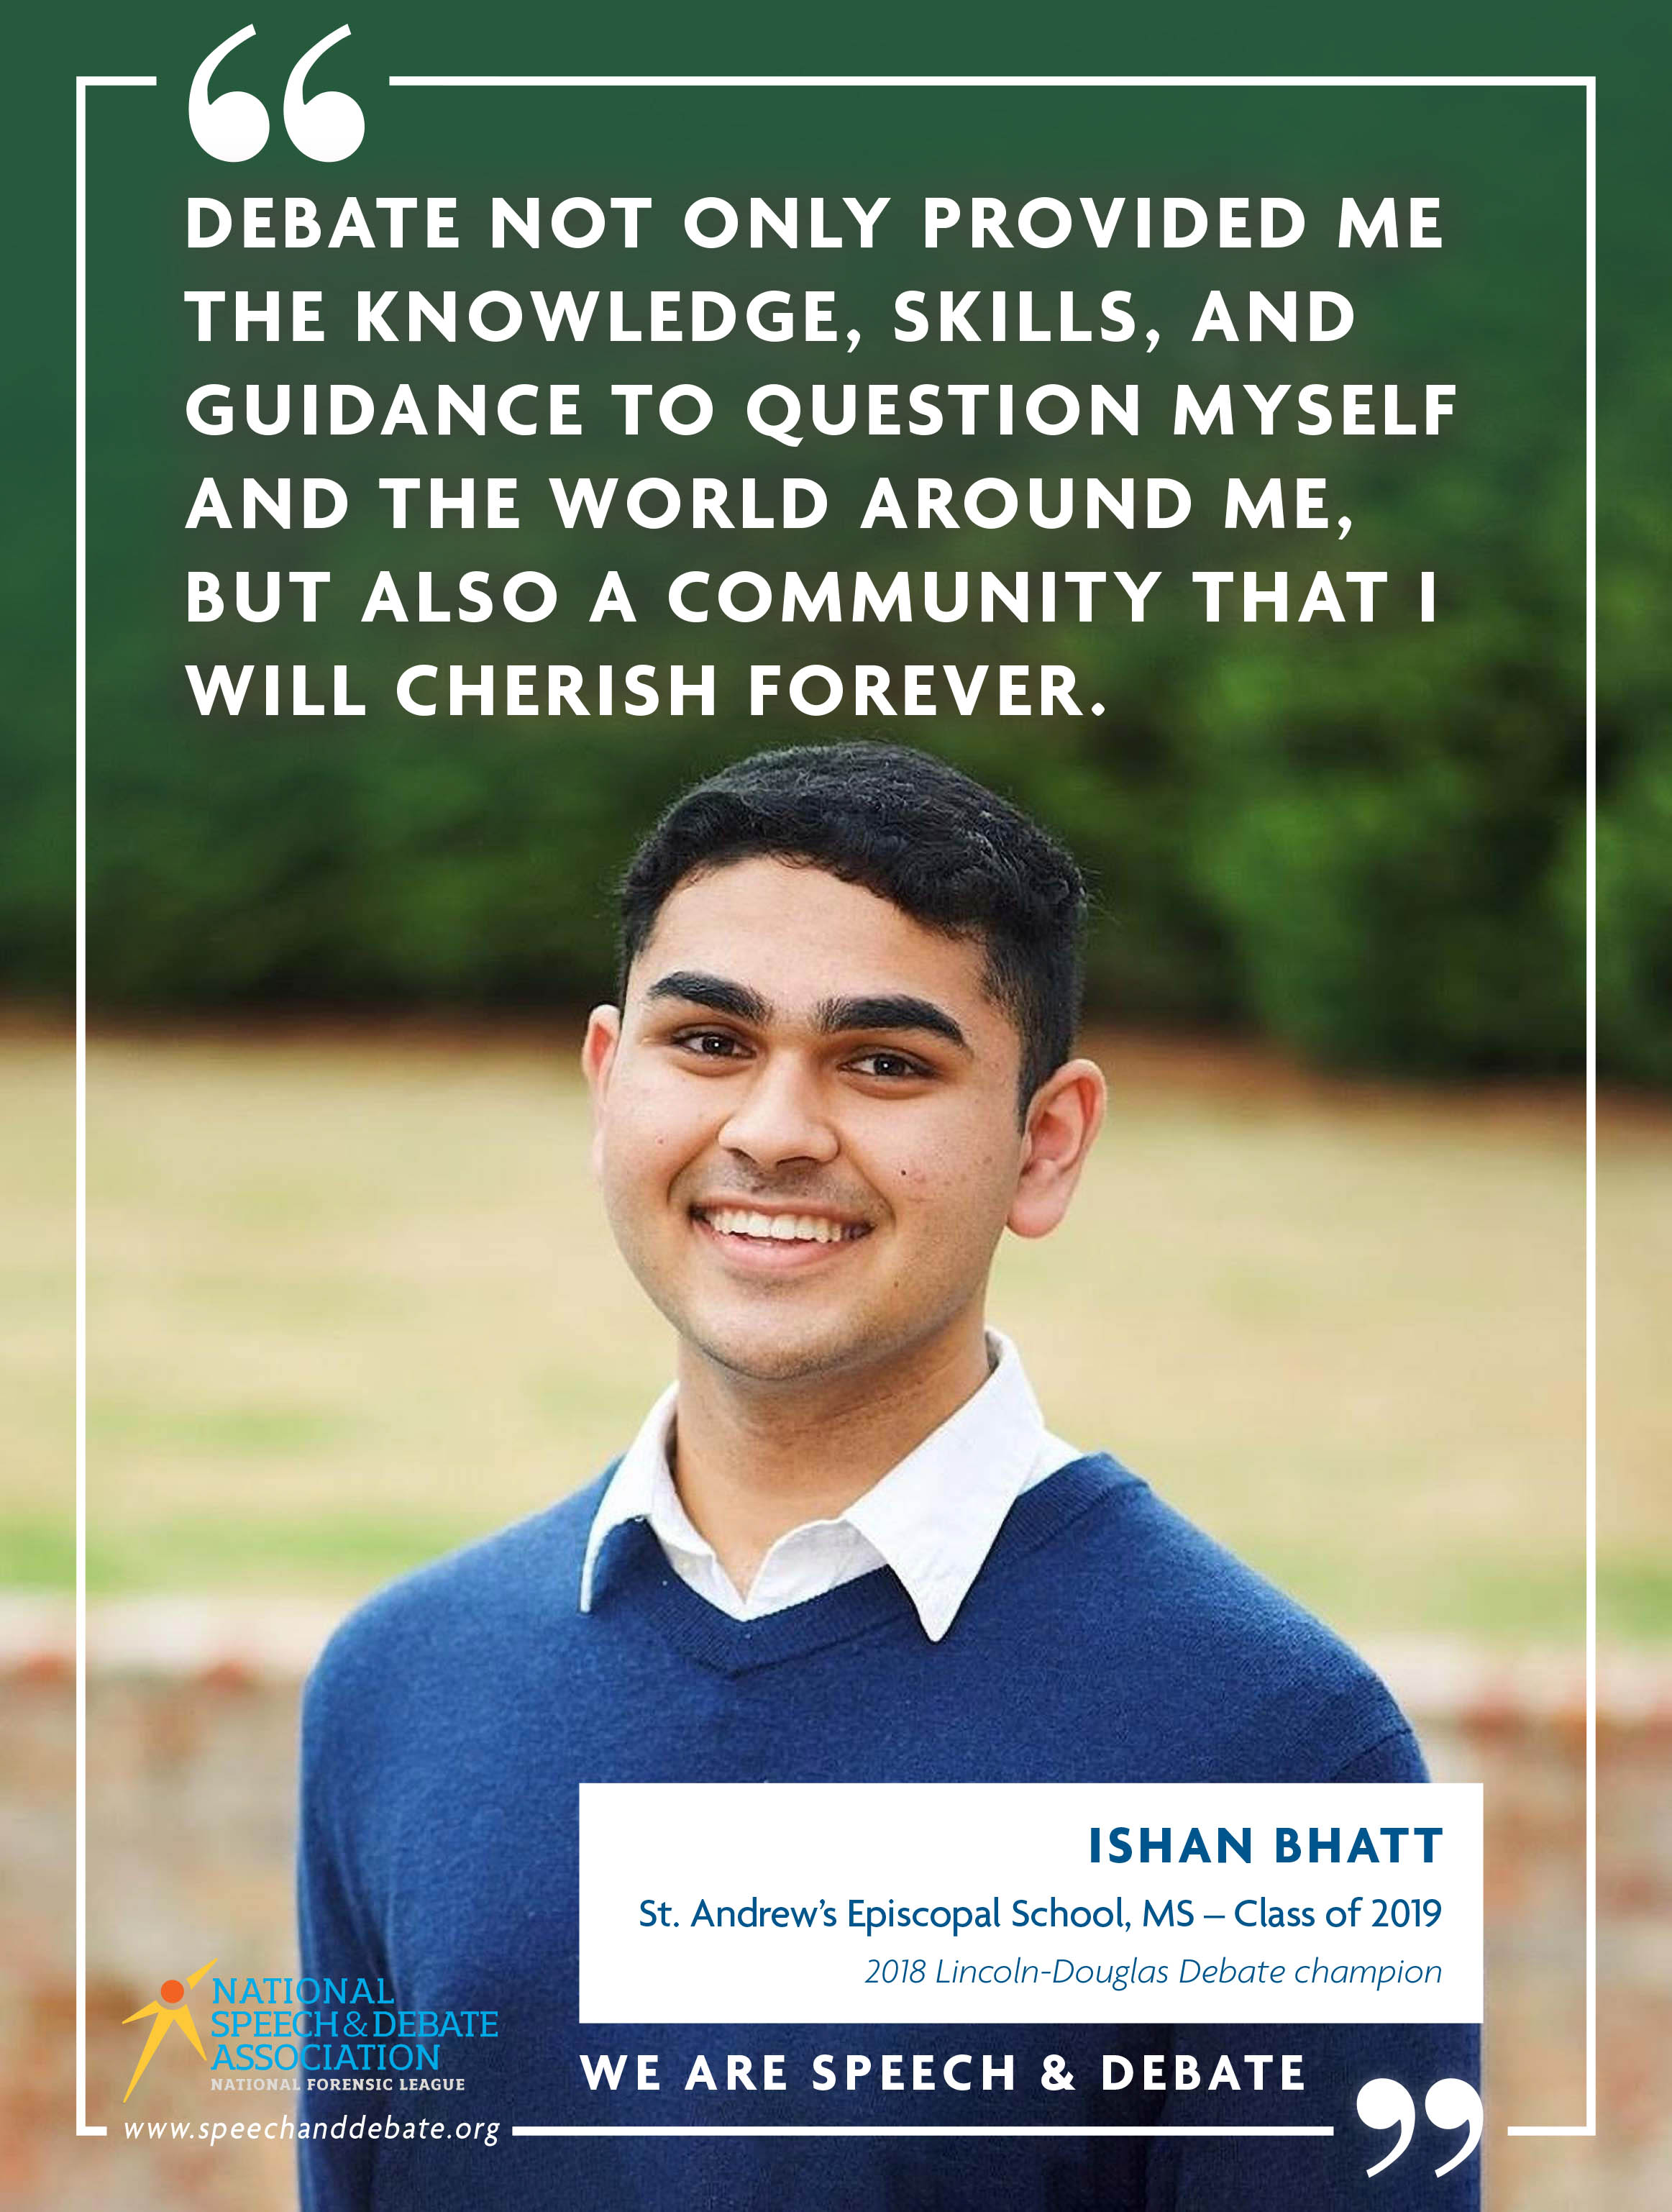 "DEBATE NOT ONLY PROVIDED ME THE KNOWLEDGE, SKILLS, AND GUIDANCE TO QUESTION MYSELF AND THE WORLD AROUND ME, BUT ALSO A COMMUNITY THAT I WILL CHERISH FOREVER." - Ishan Bhatt